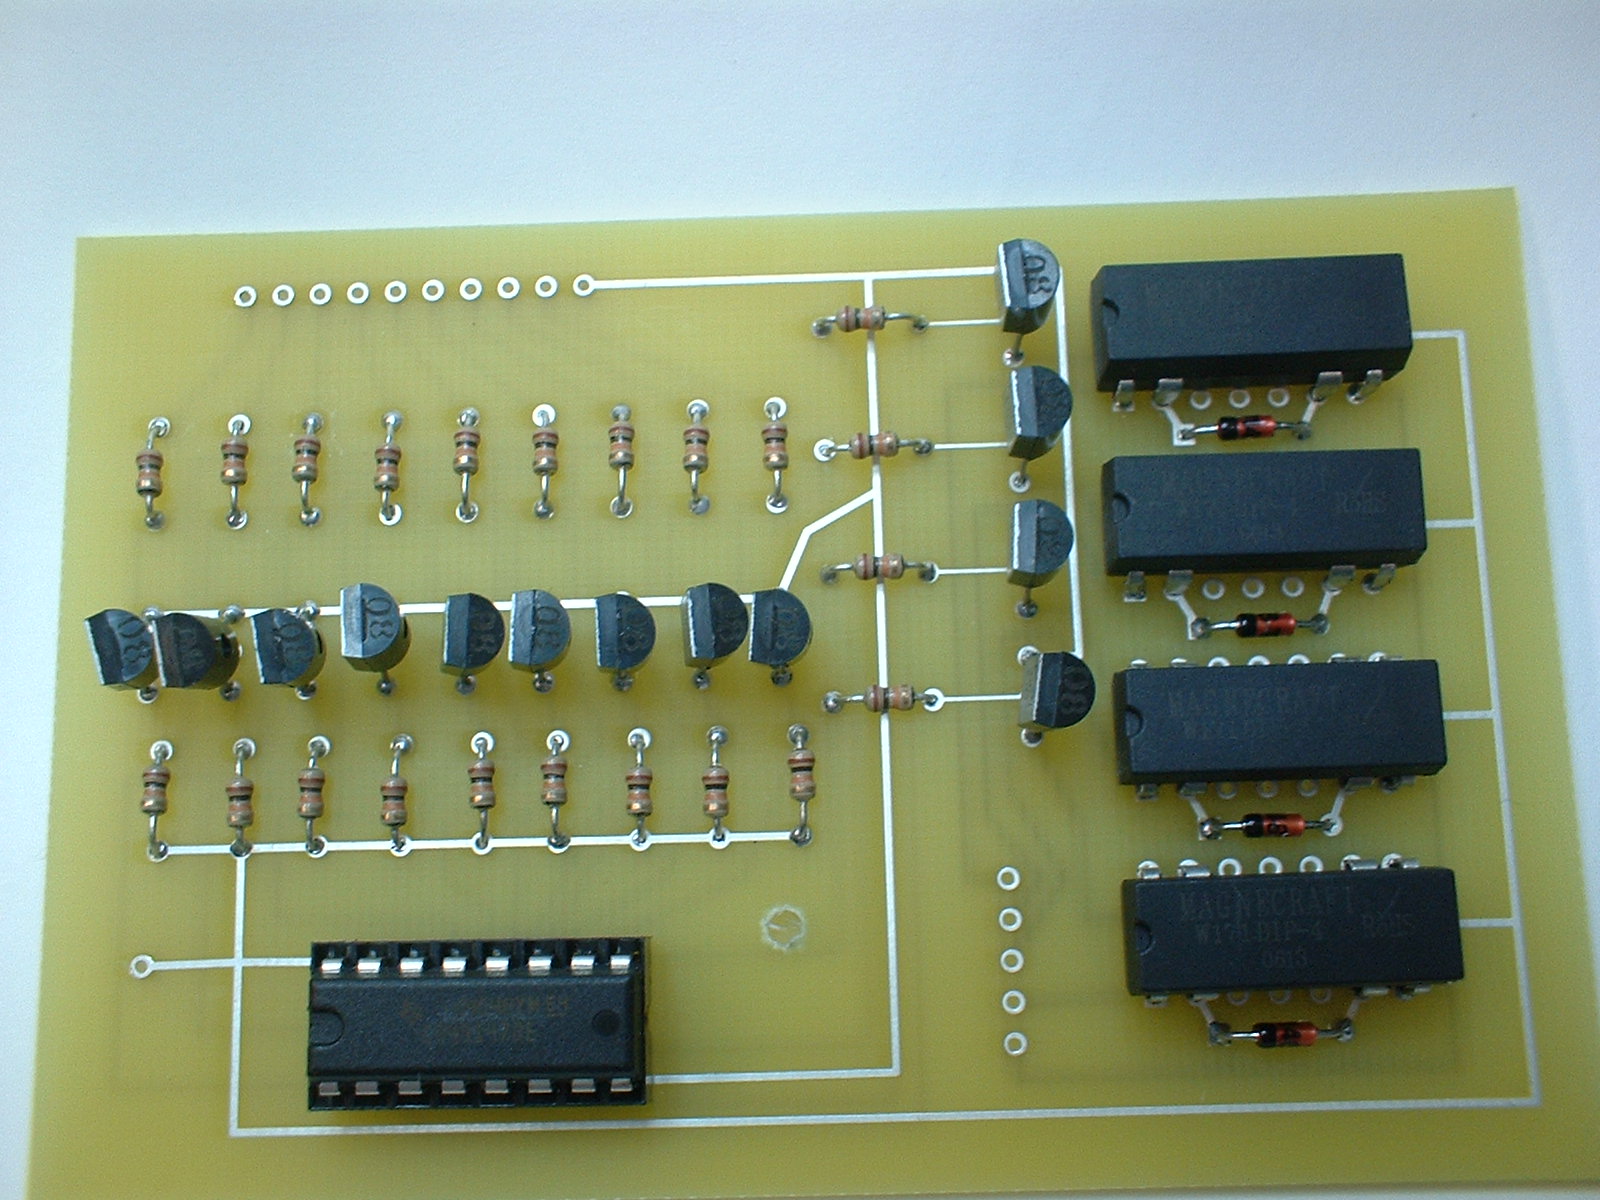 The board installed in the 850.